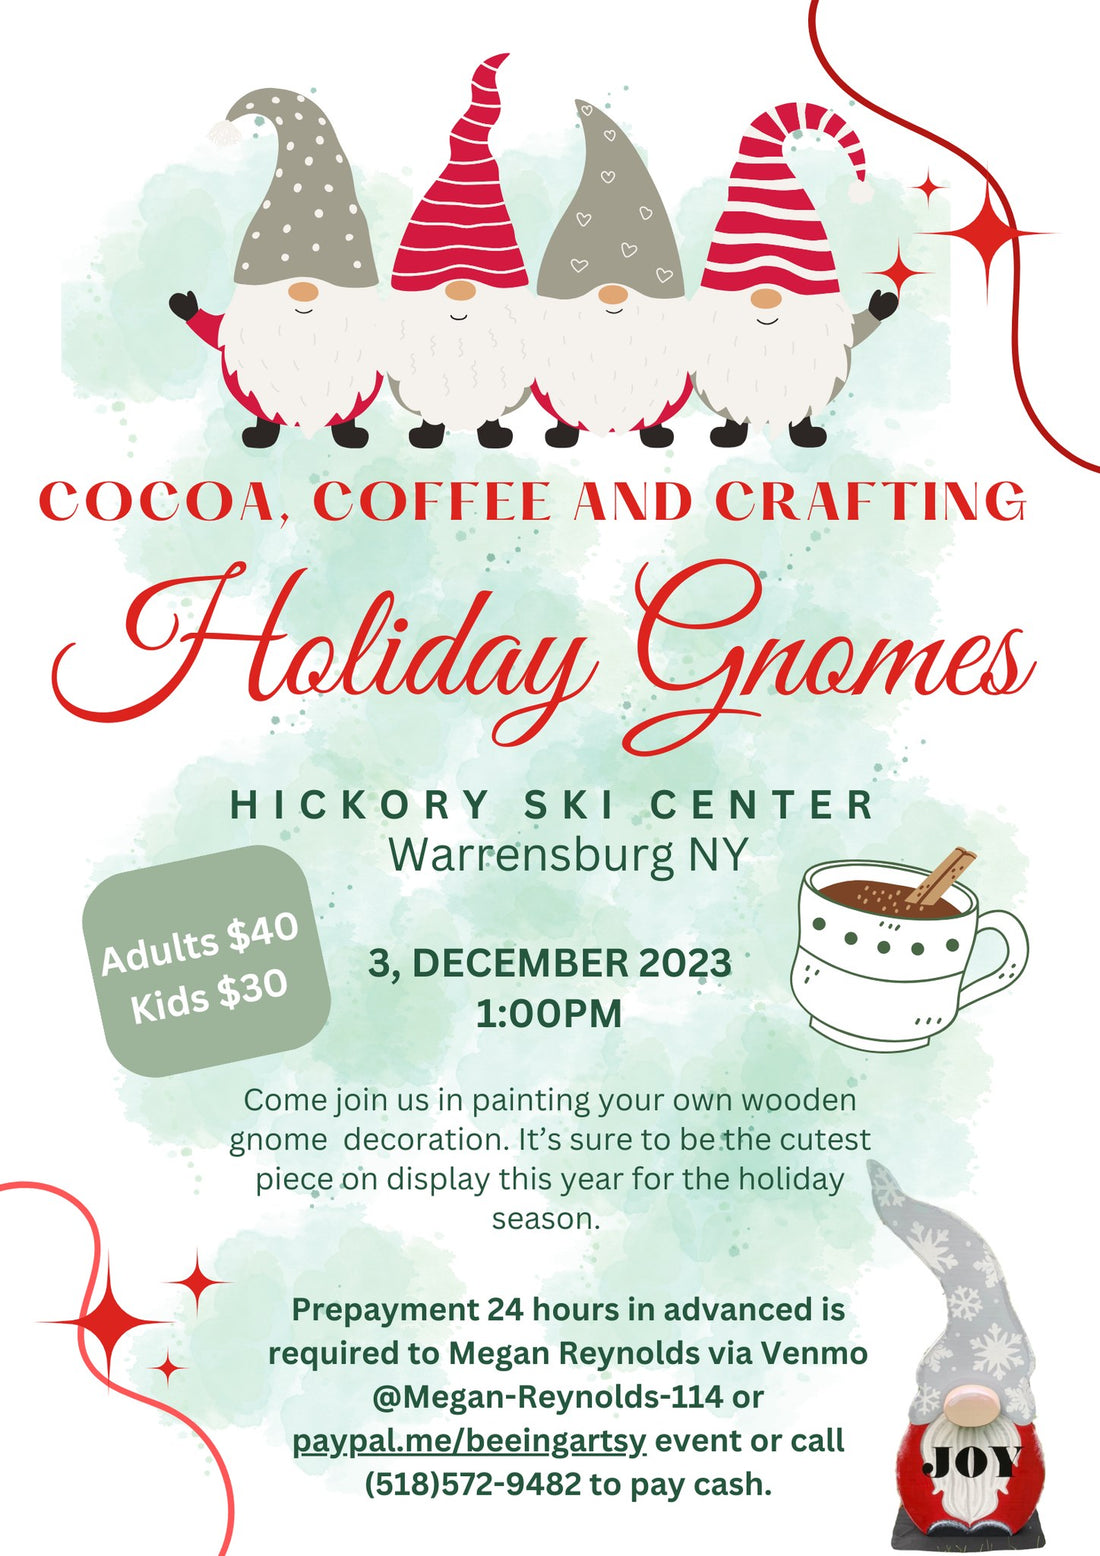 December 3 - Holiday Gnomes - Cocoa, Coffee and Crafting